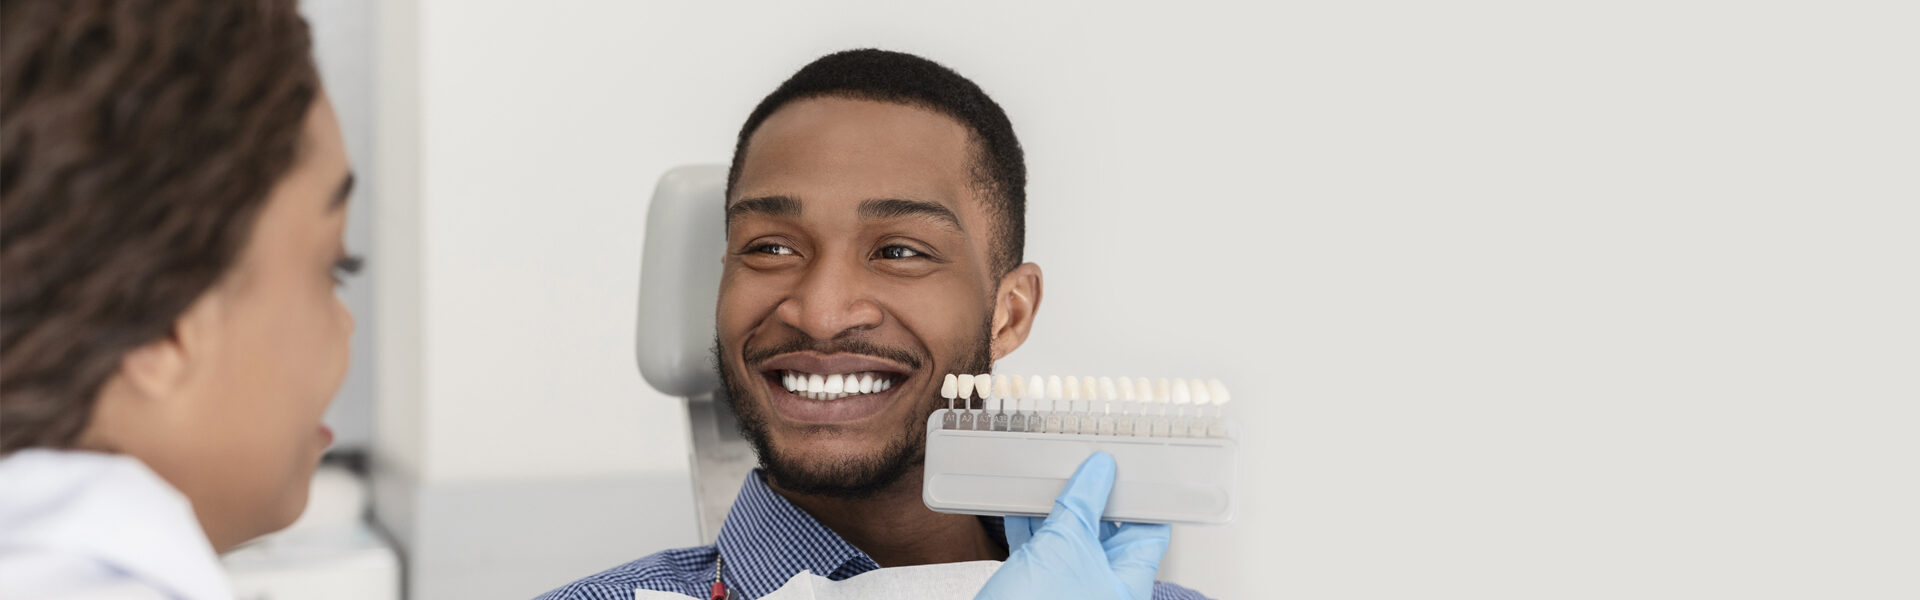 Dental Veneers: a Long-Lasting Solution for a Picture-Perfect Smile